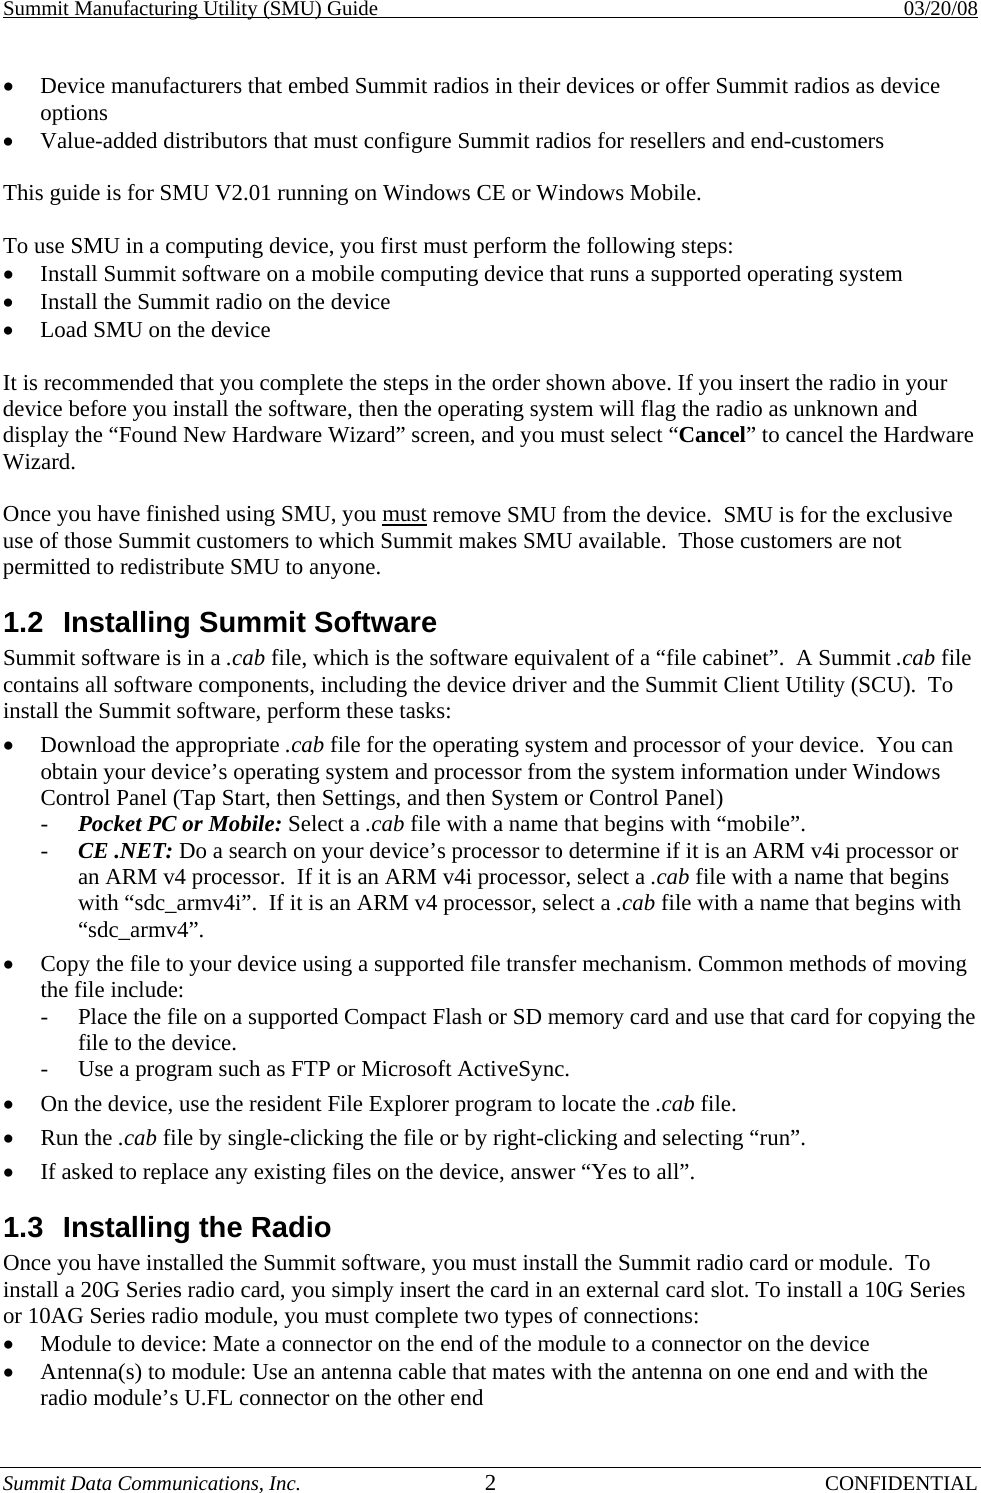 Summit Manufacturing Utility (SMU) Guide    03/20/08 Summit Data Communications, Inc.  2 CONFIDENTIAL •  Device manufacturers that embed Summit radios in their devices or offer Summit radios as device options •  Value-added distributors that must configure Summit radios for resellers and end-customers  This guide is for SMU V2.01 running on Windows CE or Windows Mobile.  To use SMU in a computing device, you first must perform the following steps: •  Install Summit software on a mobile computing device that runs a supported operating system •  Install the Summit radio on the device •  Load SMU on the device  It is recommended that you complete the steps in the order shown above. If you insert the radio in your device before you install the software, then the operating system will flag the radio as unknown and display the “Found New Hardware Wizard” screen, and you must select “Cancel” to cancel the Hardware Wizard.  Once you have finished using SMU, you must remove SMU from the device.  SMU is for the exclusive use of those Summit customers to which Summit makes SMU available.  Those customers are not permitted to redistribute SMU to anyone. 1.2  Installing Summit Software Summit software is in a .cab file, which is the software equivalent of a “file cabinet”.  A Summit .cab file contains all software components, including the device driver and the Summit Client Utility (SCU).  To install the Summit software, perform these tasks: •  Download the appropriate .cab file for the operating system and processor of your device.  You can obtain your device’s operating system and processor from the system information under Windows Control Panel (Tap Start, then Settings, and then System or Control Panel) -  Pocket PC or Mobile: Select a .cab file with a name that begins with “mobile”. -  CE .NET: Do a search on your device’s processor to determine if it is an ARM v4i processor or an ARM v4 processor.  If it is an ARM v4i processor, select a .cab file with a name that begins with “sdc_armv4i”.  If it is an ARM v4 processor, select a .cab file with a name that begins with “sdc_armv4”. •  Copy the file to your device using a supported file transfer mechanism. Common methods of moving the file include: -  Place the file on a supported Compact Flash or SD memory card and use that card for copying the file to the device. -  Use a program such as FTP or Microsoft ActiveSync. •  On the device, use the resident File Explorer program to locate the .cab file. •  Run the .cab file by single-clicking the file or by right-clicking and selecting “run”. •  If asked to replace any existing files on the device, answer “Yes to all”. 1.3  Installing the Radio Once you have installed the Summit software, you must install the Summit radio card or module.  To install a 20G Series radio card, you simply insert the card in an external card slot. To install a 10G Series or 10AG Series radio module, you must complete two types of connections: •  Module to device: Mate a connector on the end of the module to a connector on the device •  Antenna(s) to module: Use an antenna cable that mates with the antenna on one end and with the radio module’s U.FL connector on the other end 